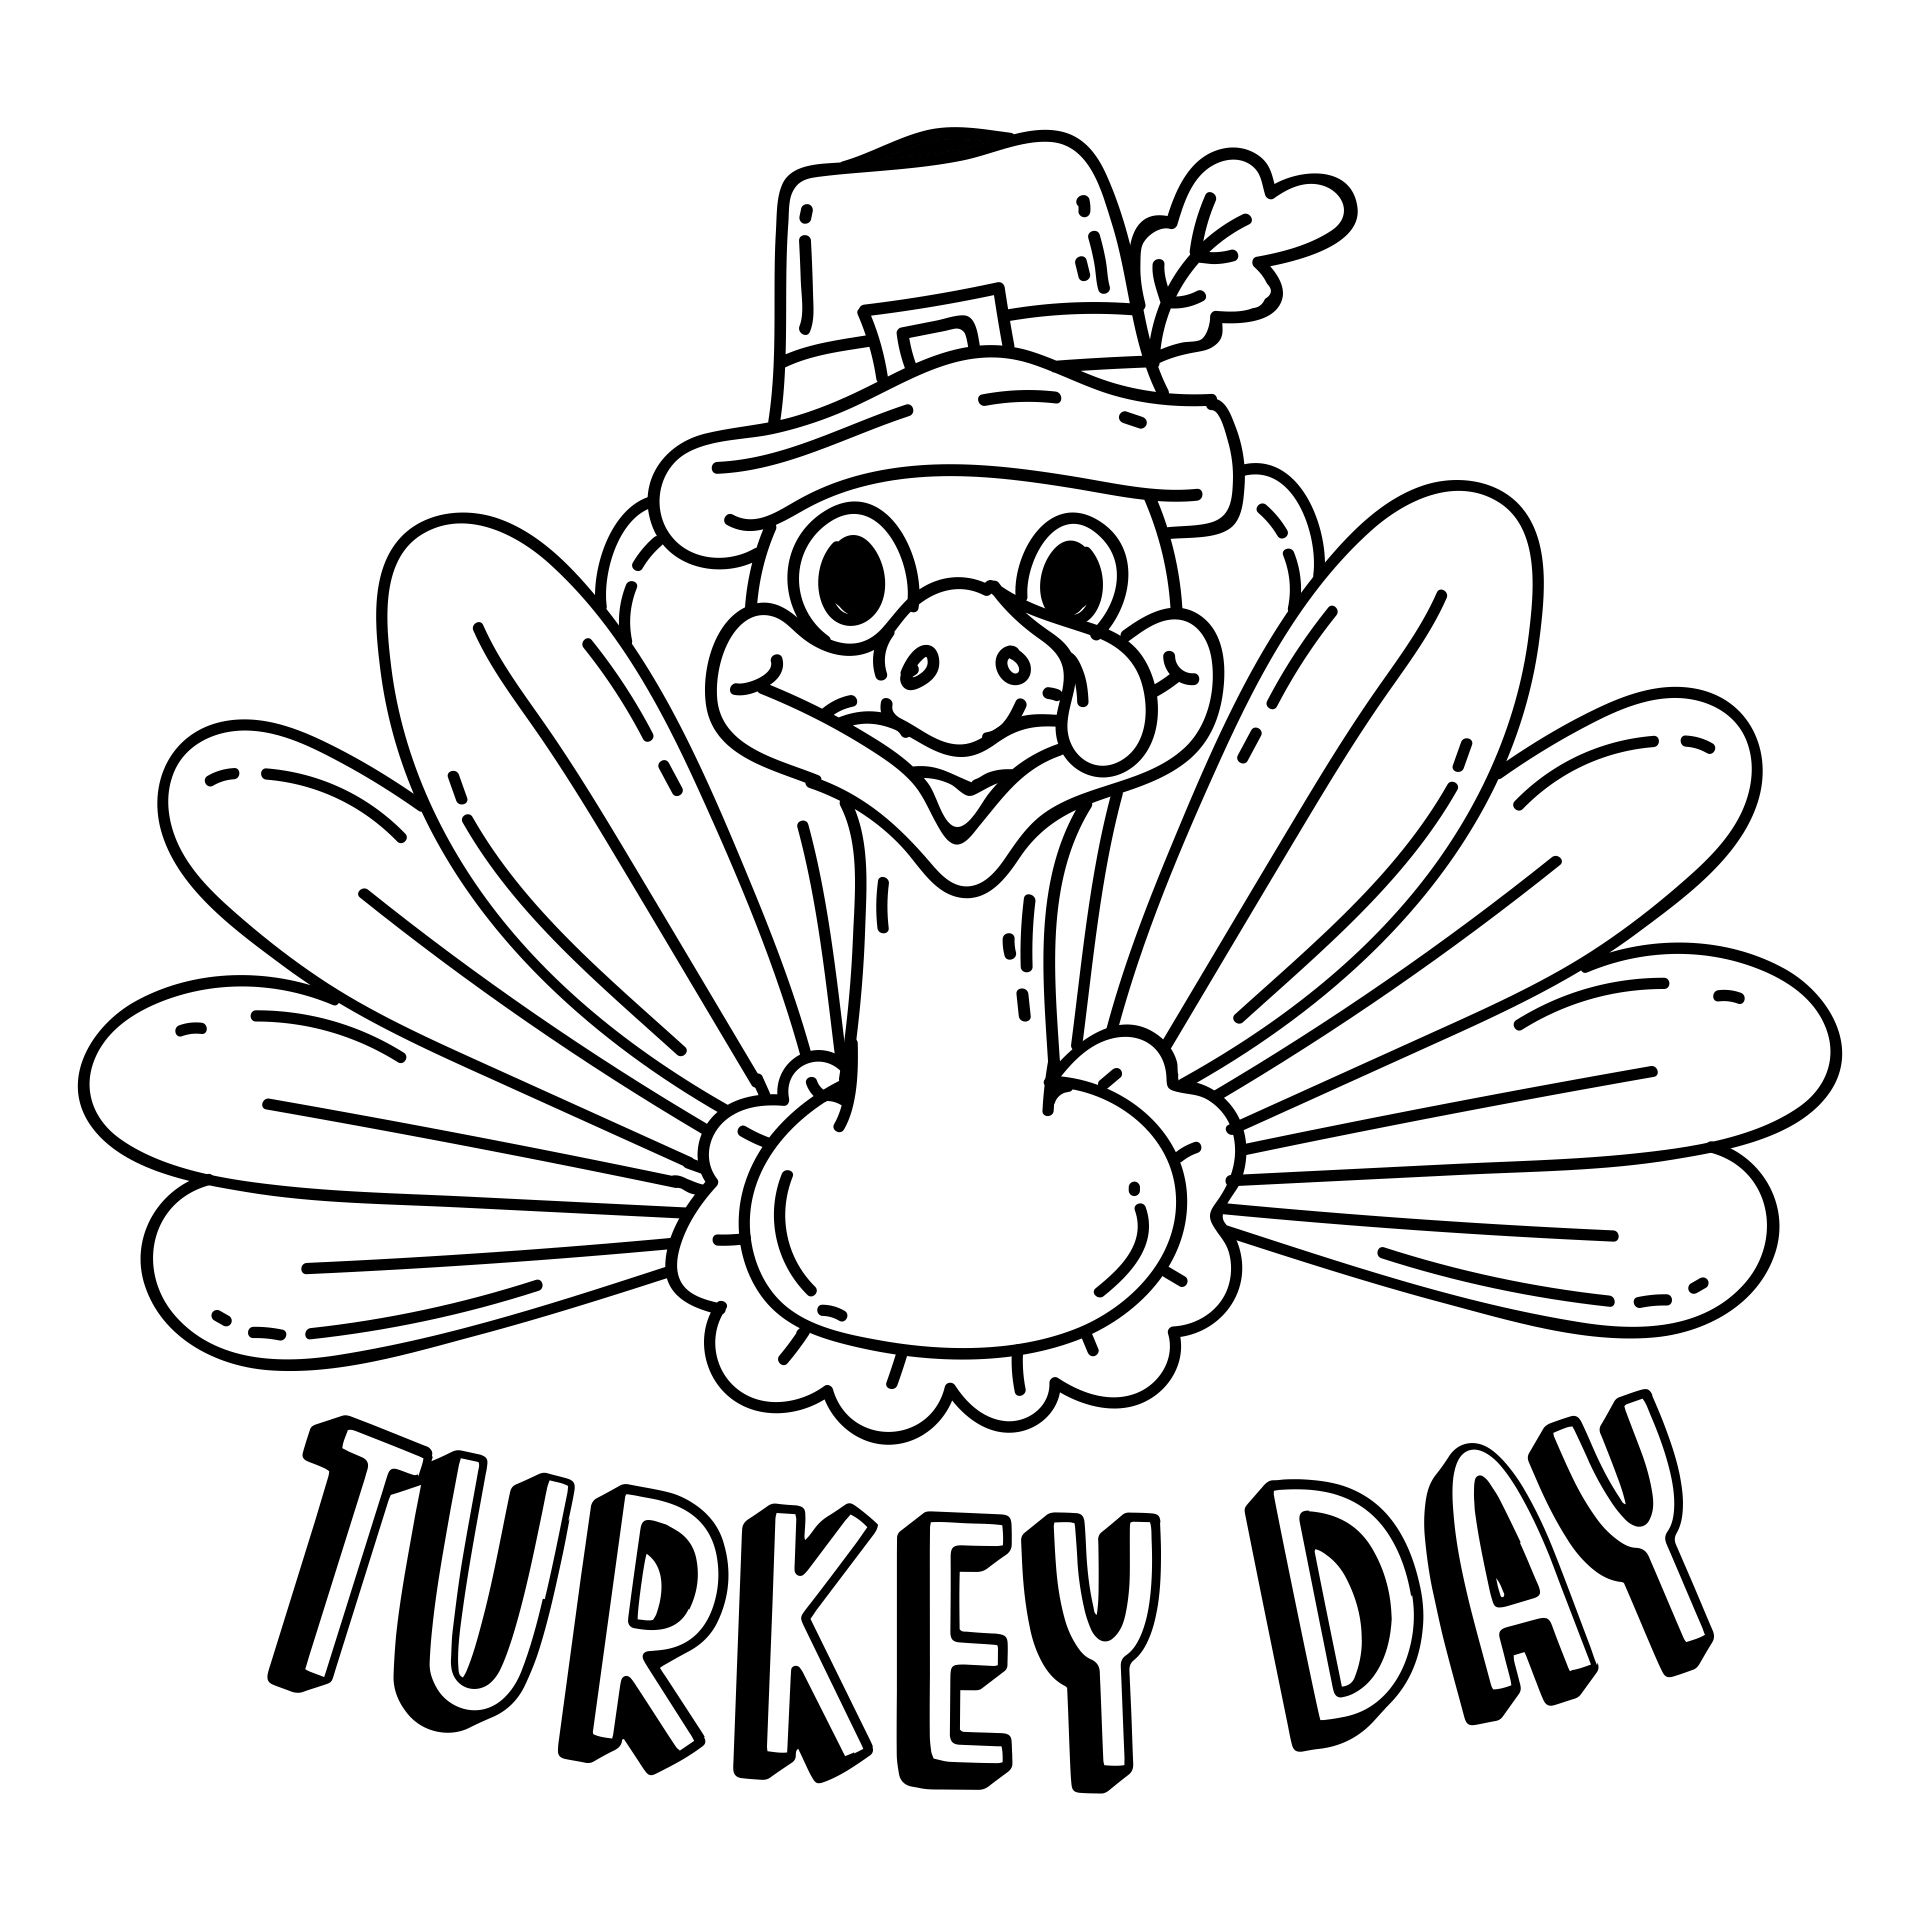 Thanksgiving Coloring Pages For Turkey Day